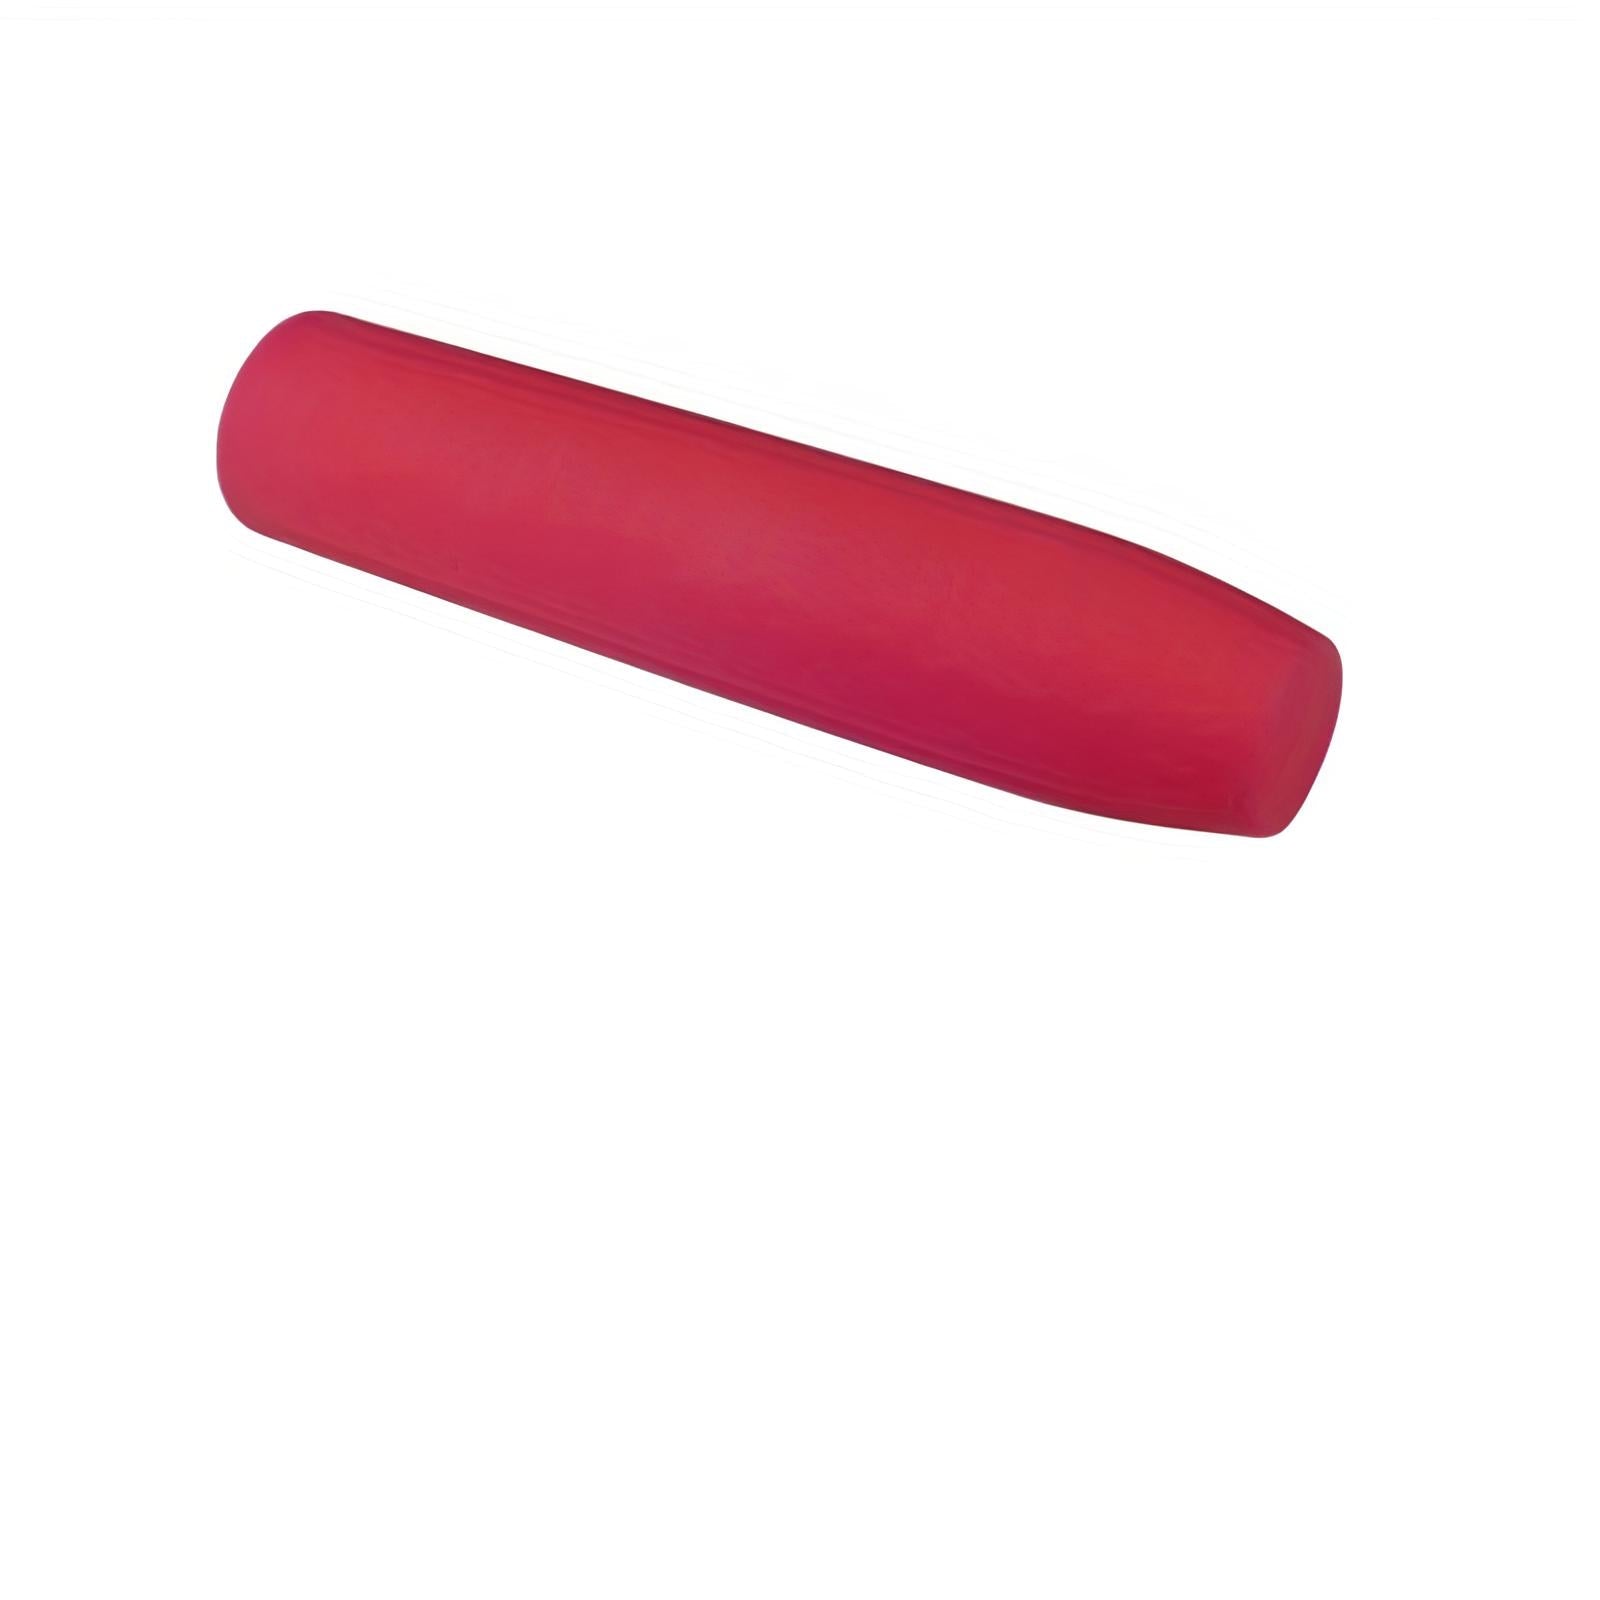 Eplucheur d'ail en silicone - UstensilesCulinaires